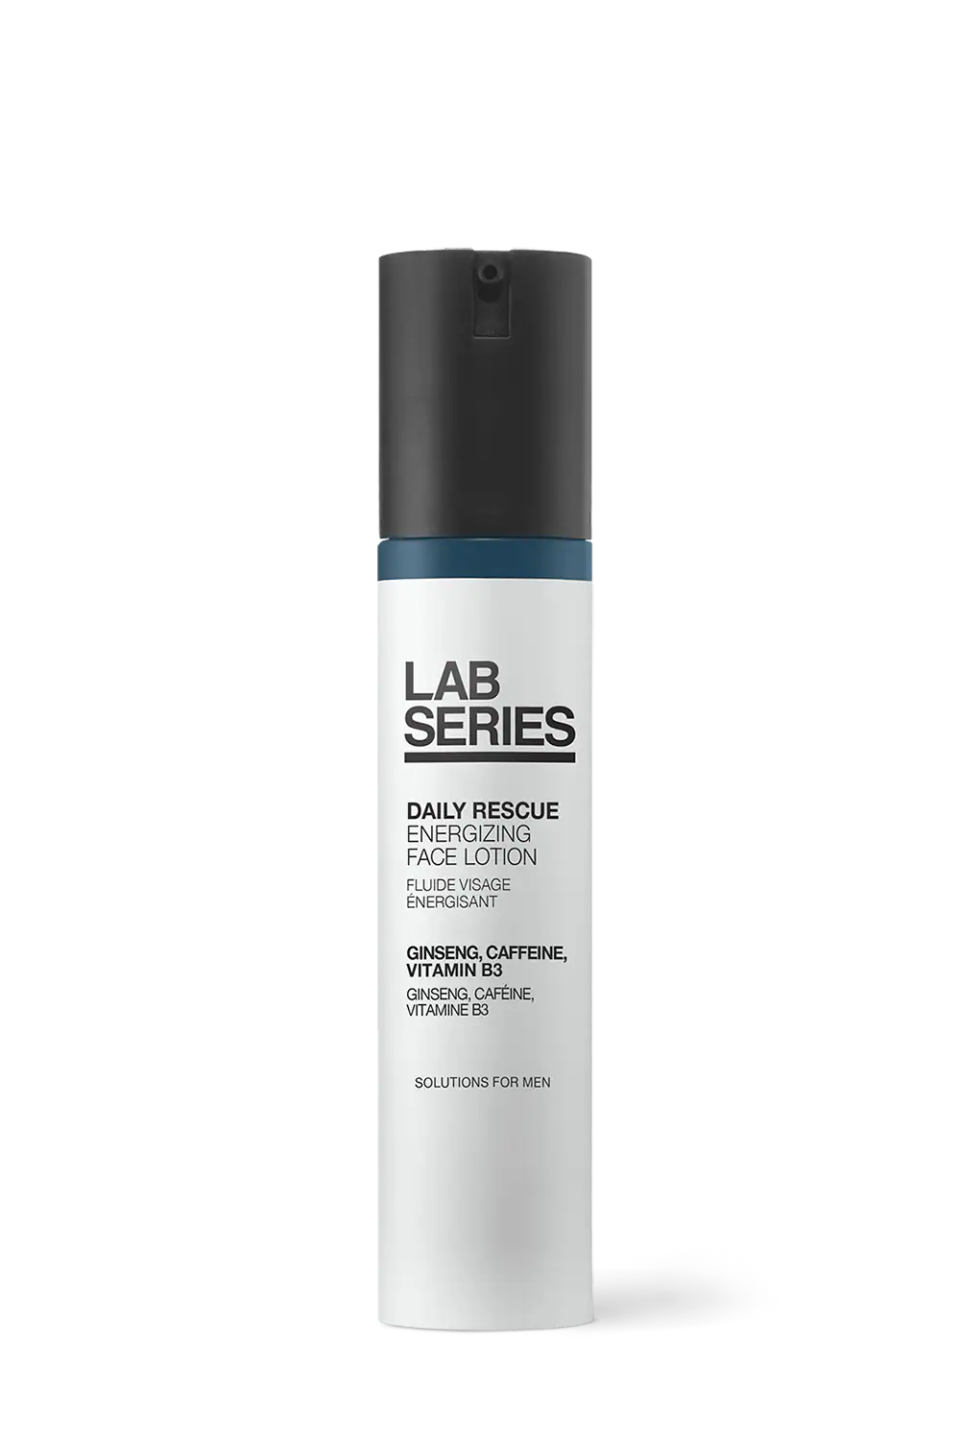 Lab Series Daily Rescue Energizing Face Lotion; best men's skincare brands, best skincare brands for men